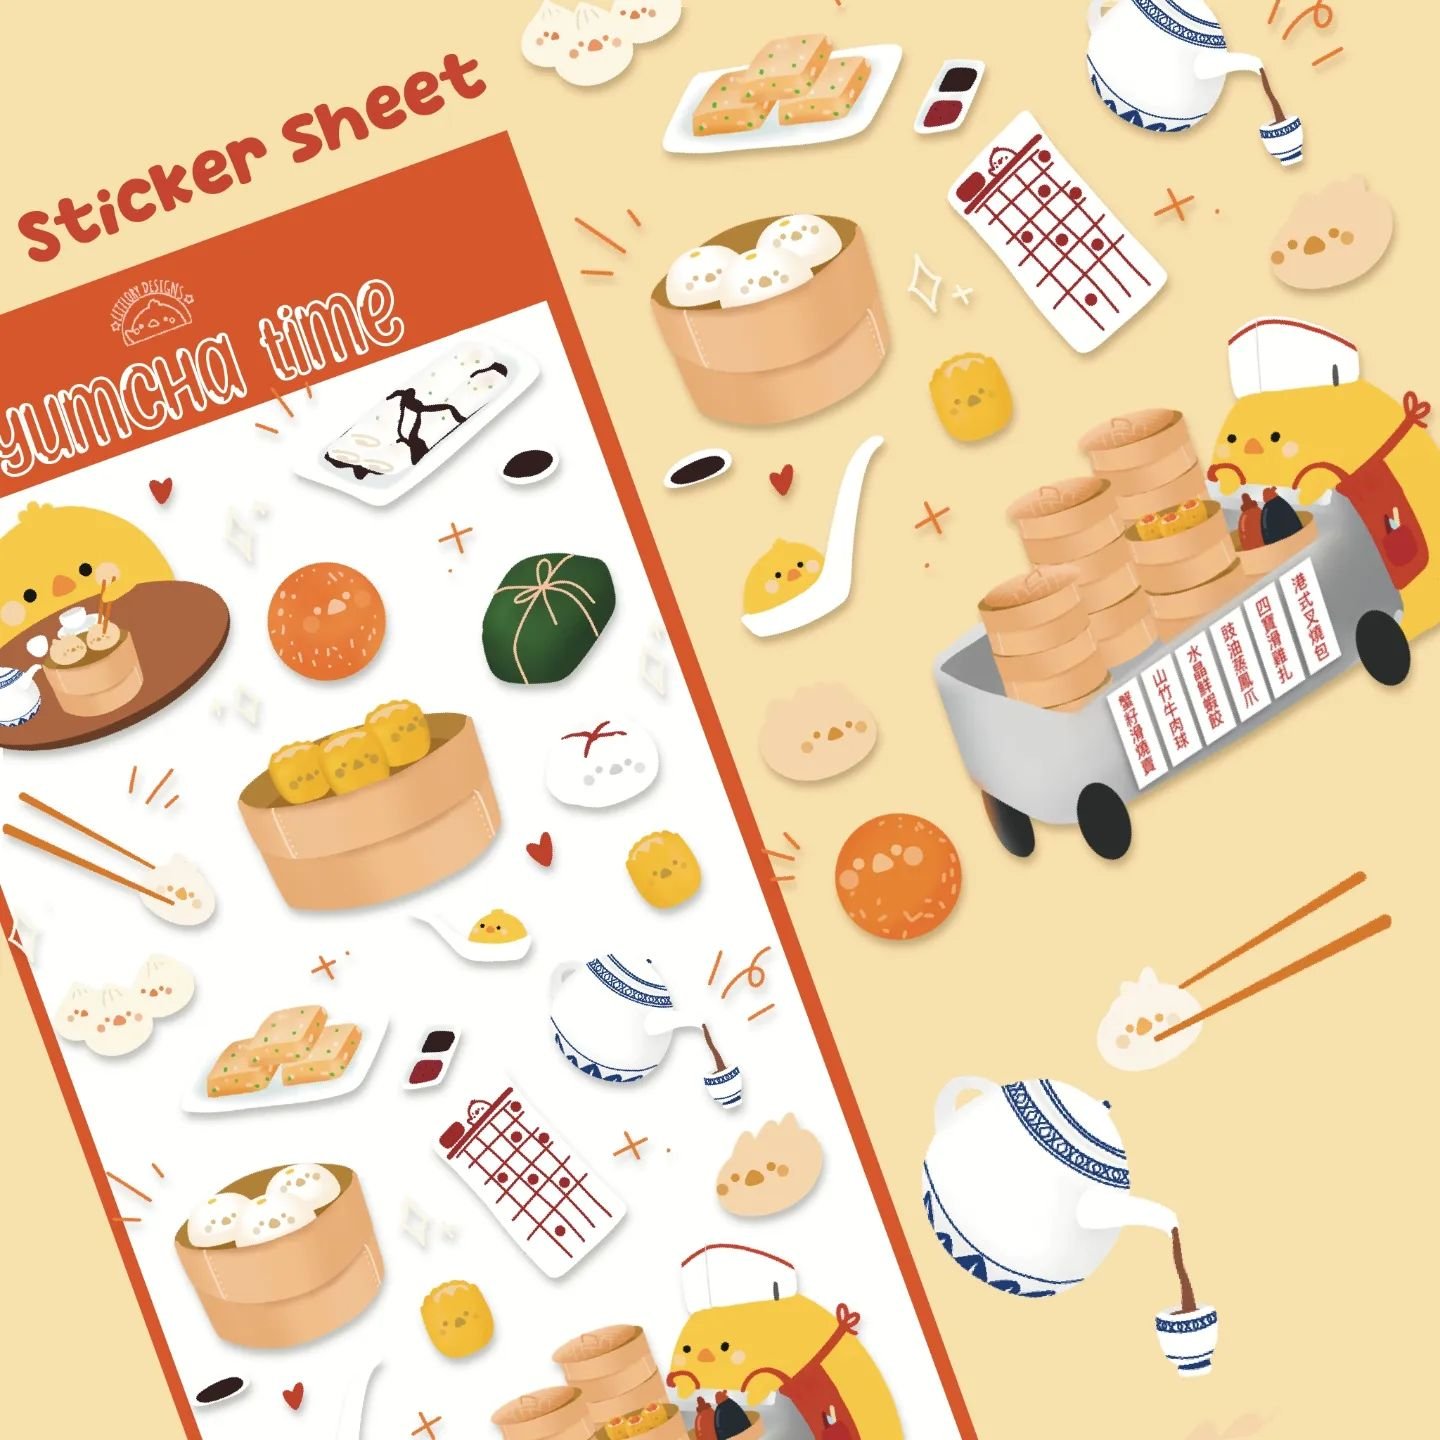 Anyone love Yumcha???🙋🏻&zwj;♀️🥟

The best part is when they come out with the trolley, and of course, the professional auntie 😉

#yumcha #hongkongfood #Melbourne #yumchahk #dimsum #stickersheet #cute #chicken #chinesefood #dumplings #steambuns #f